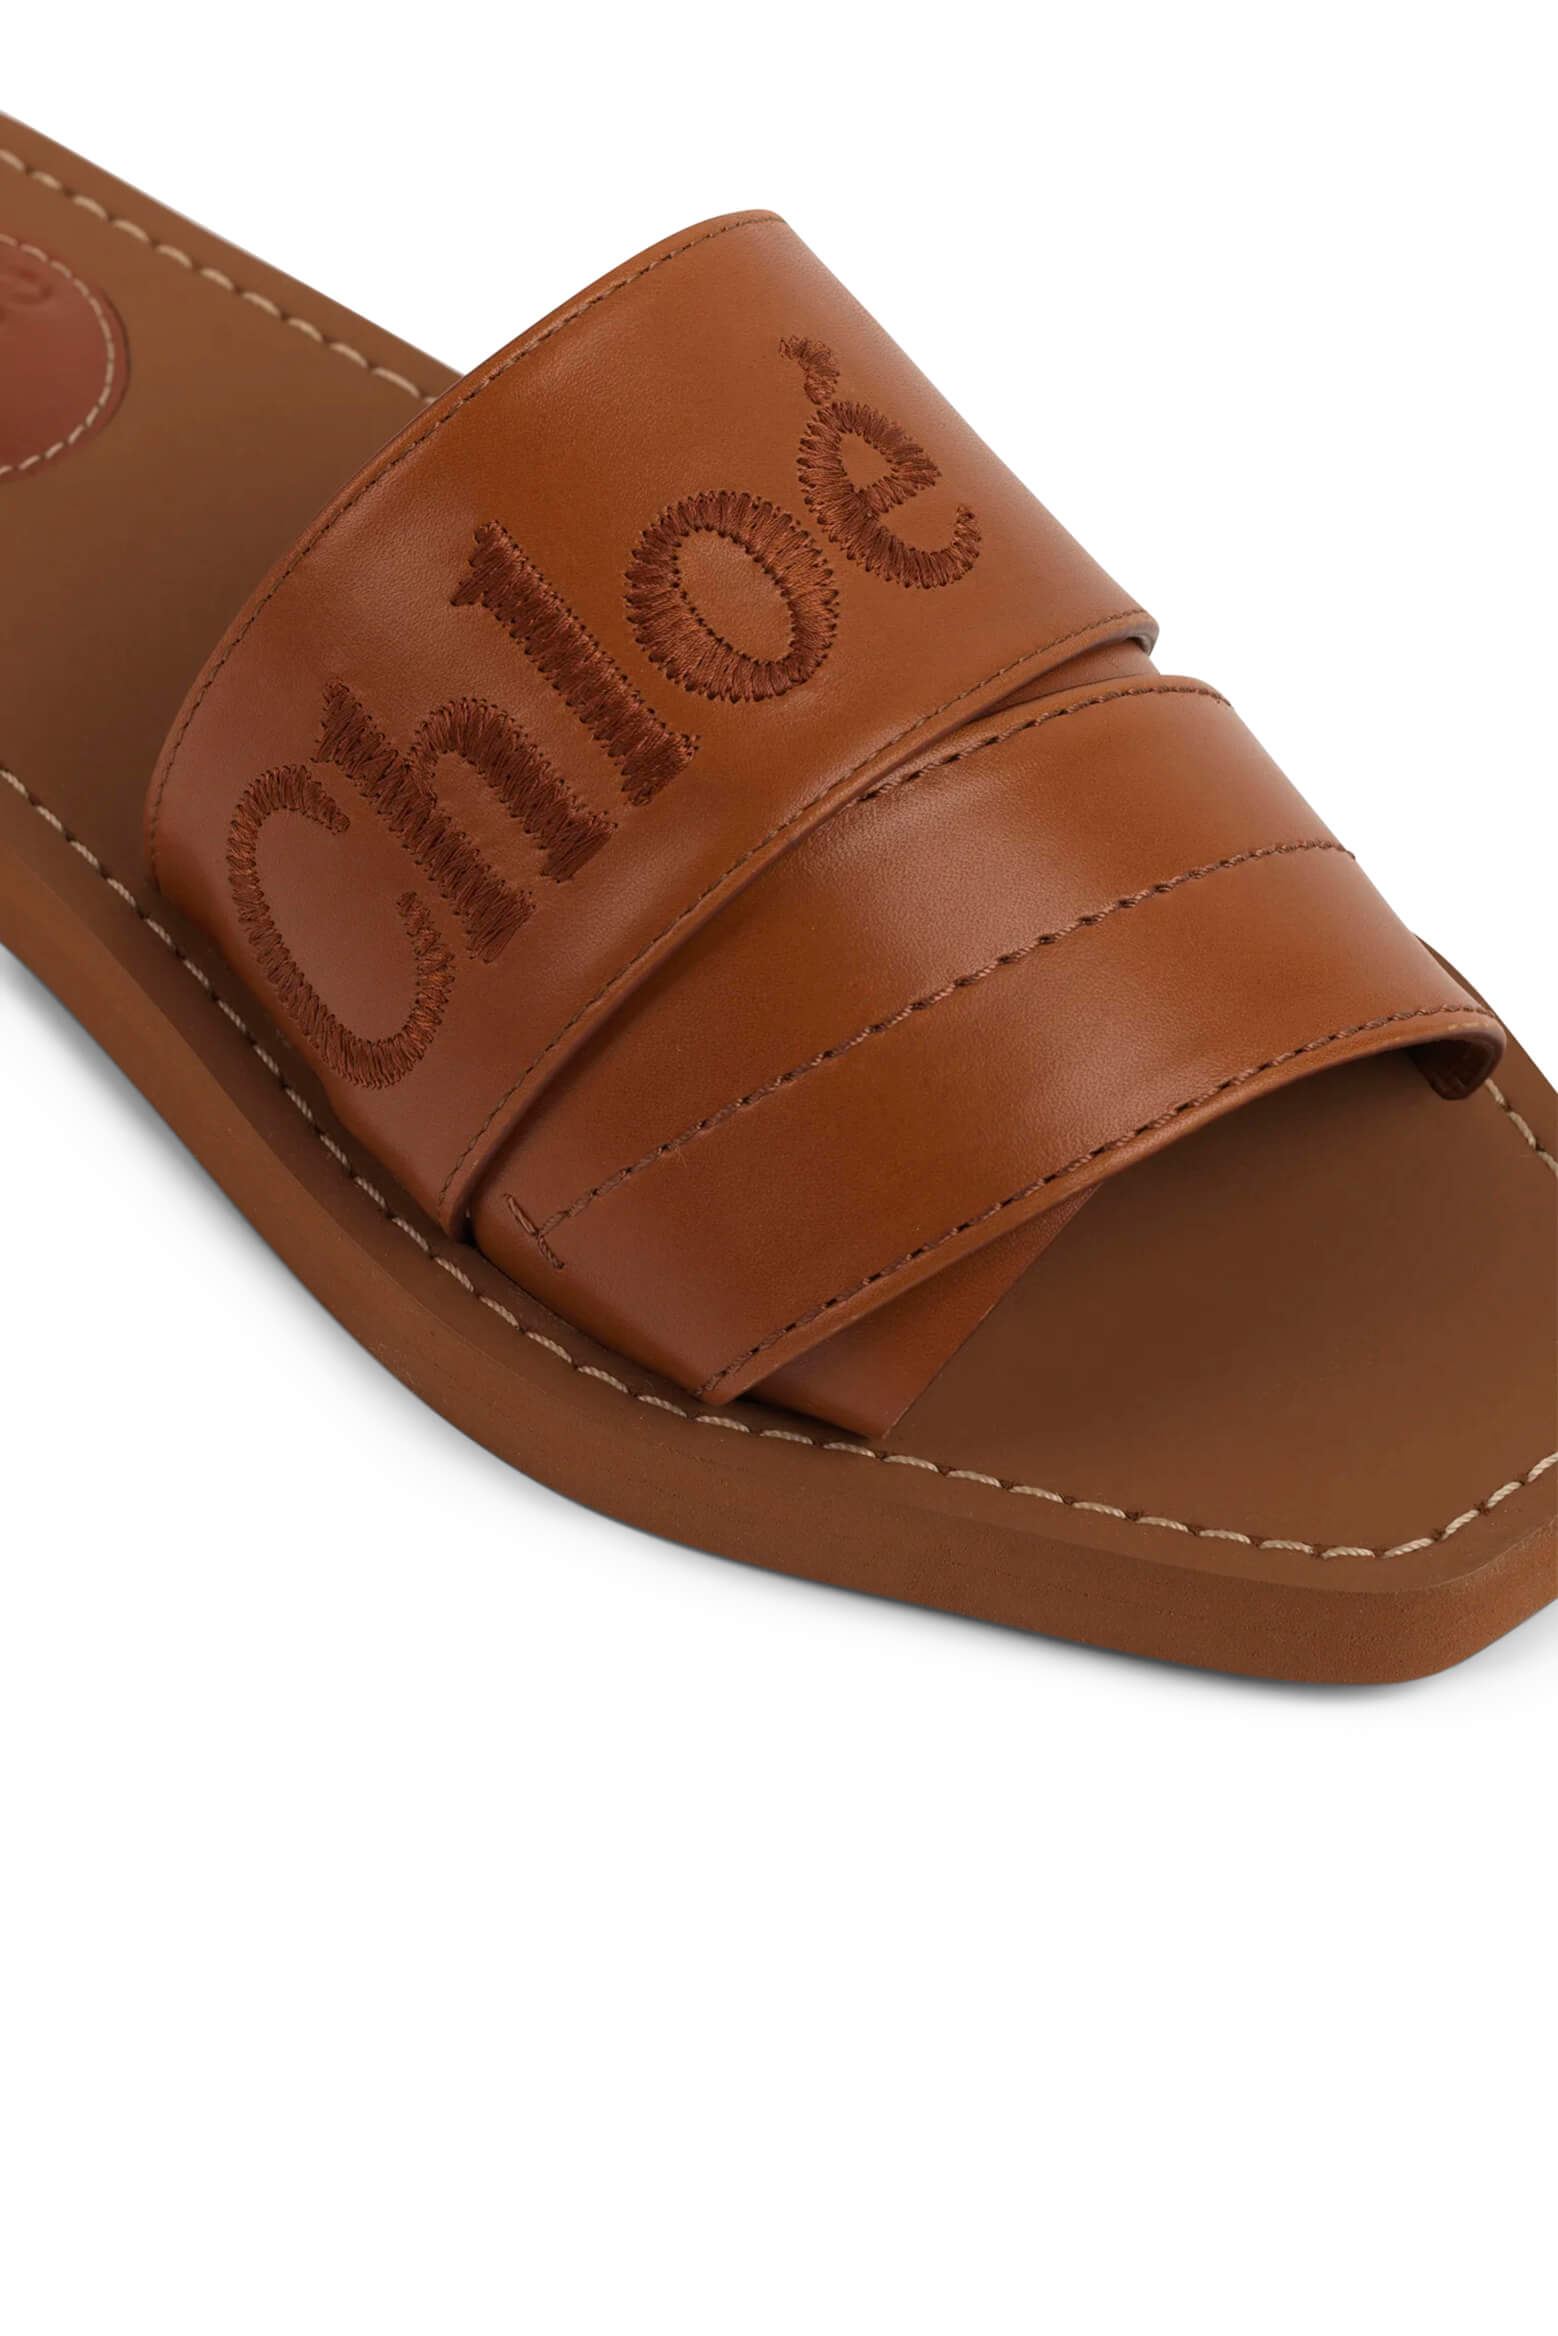 Chloe Woody Leather Slide in Caramel from The New Trend